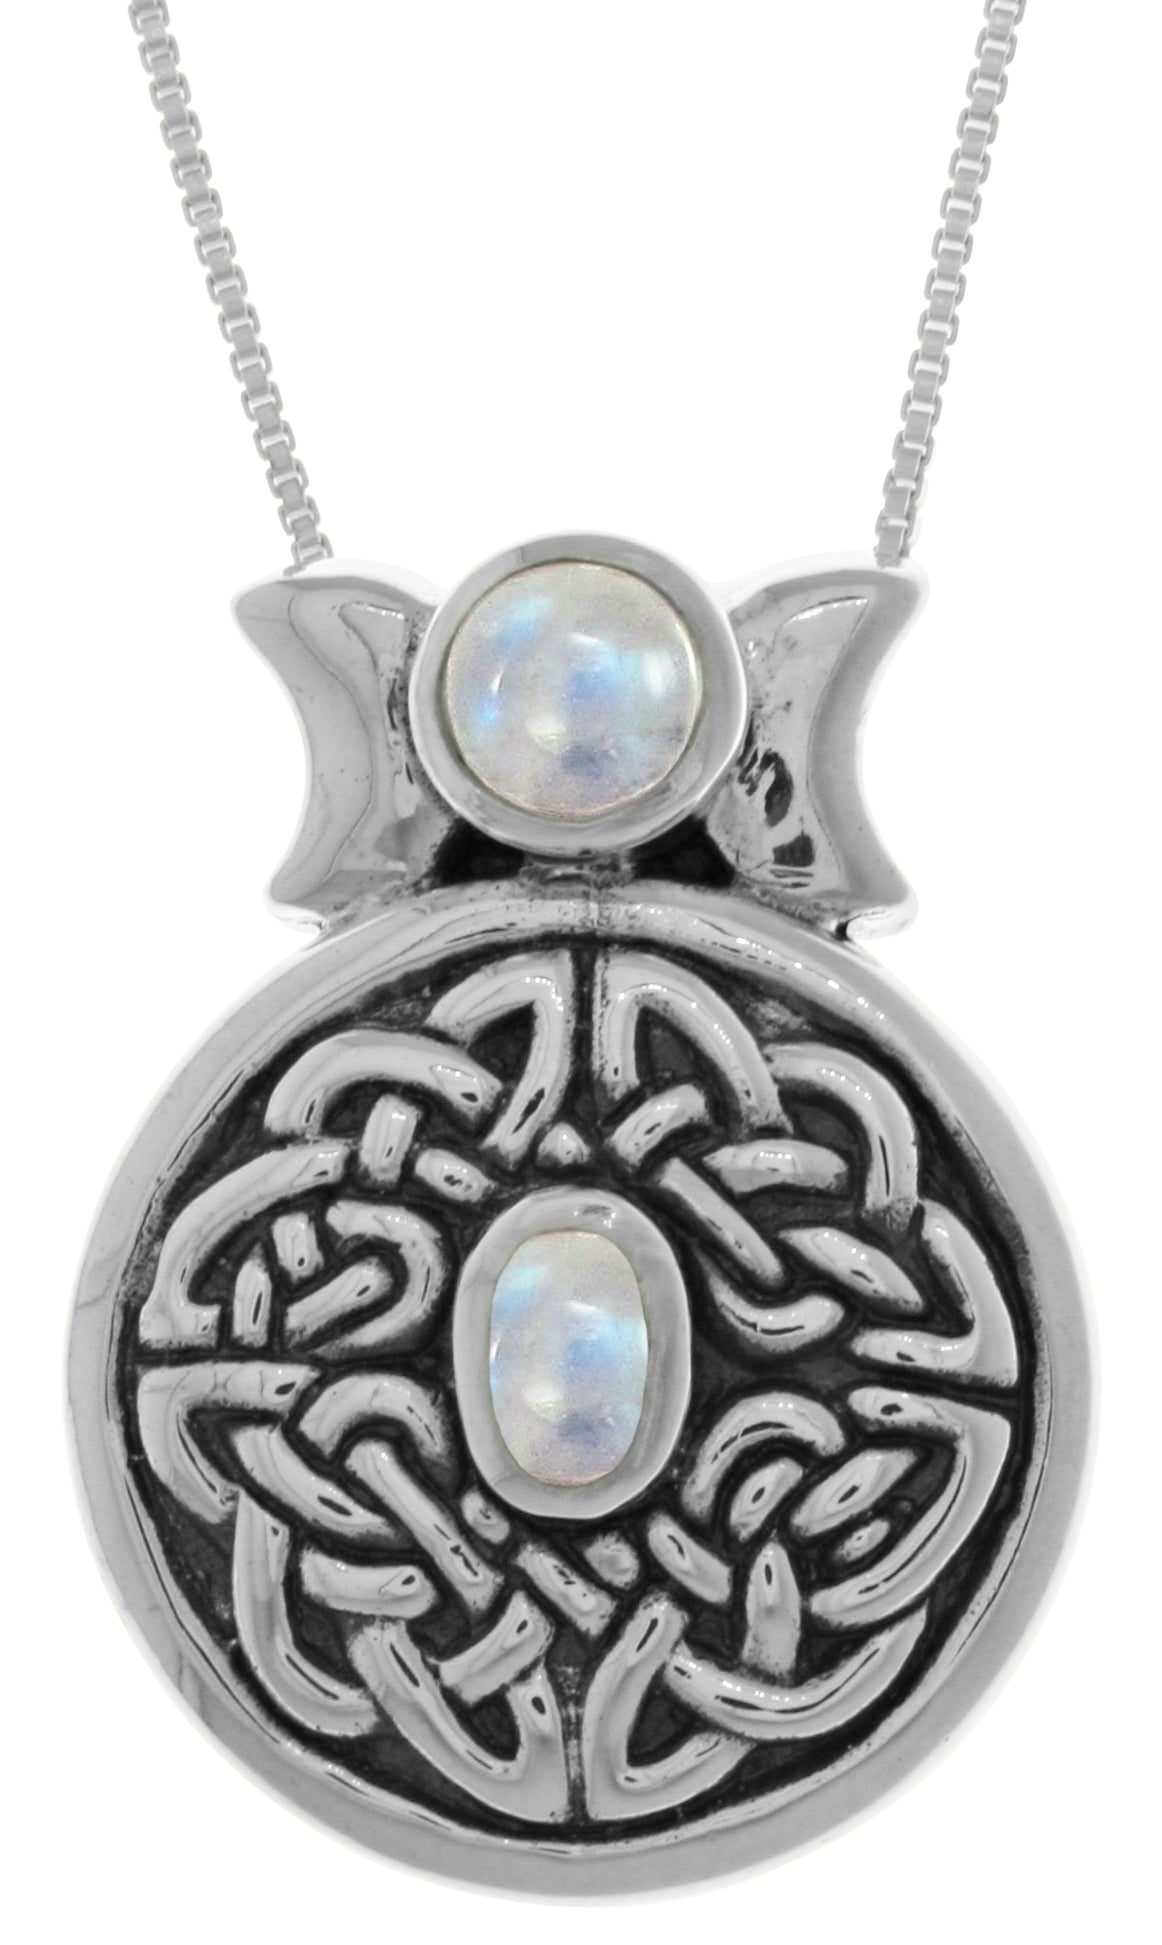 Jewelry Trends Sterling Silver Round Celtic Moon Goddess Pendant with Moonstone on 18 Inch Box Chain Necklace